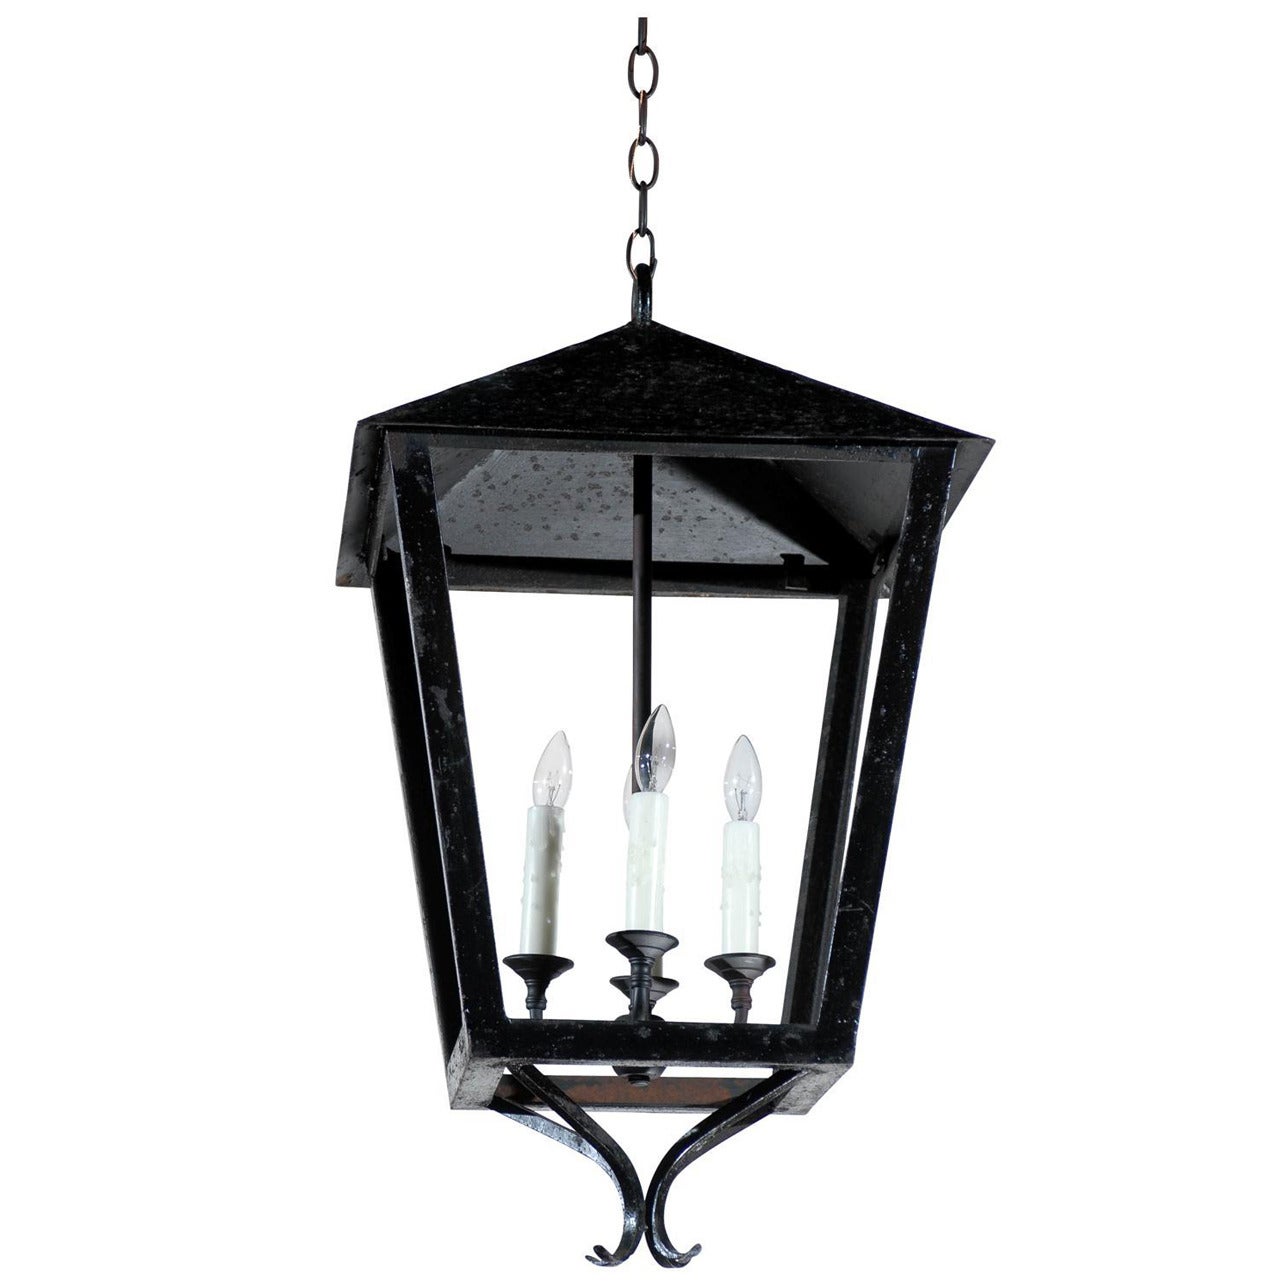 French Vintage Black Iron Four-Light Lantern with Triangular Top and Scrolls